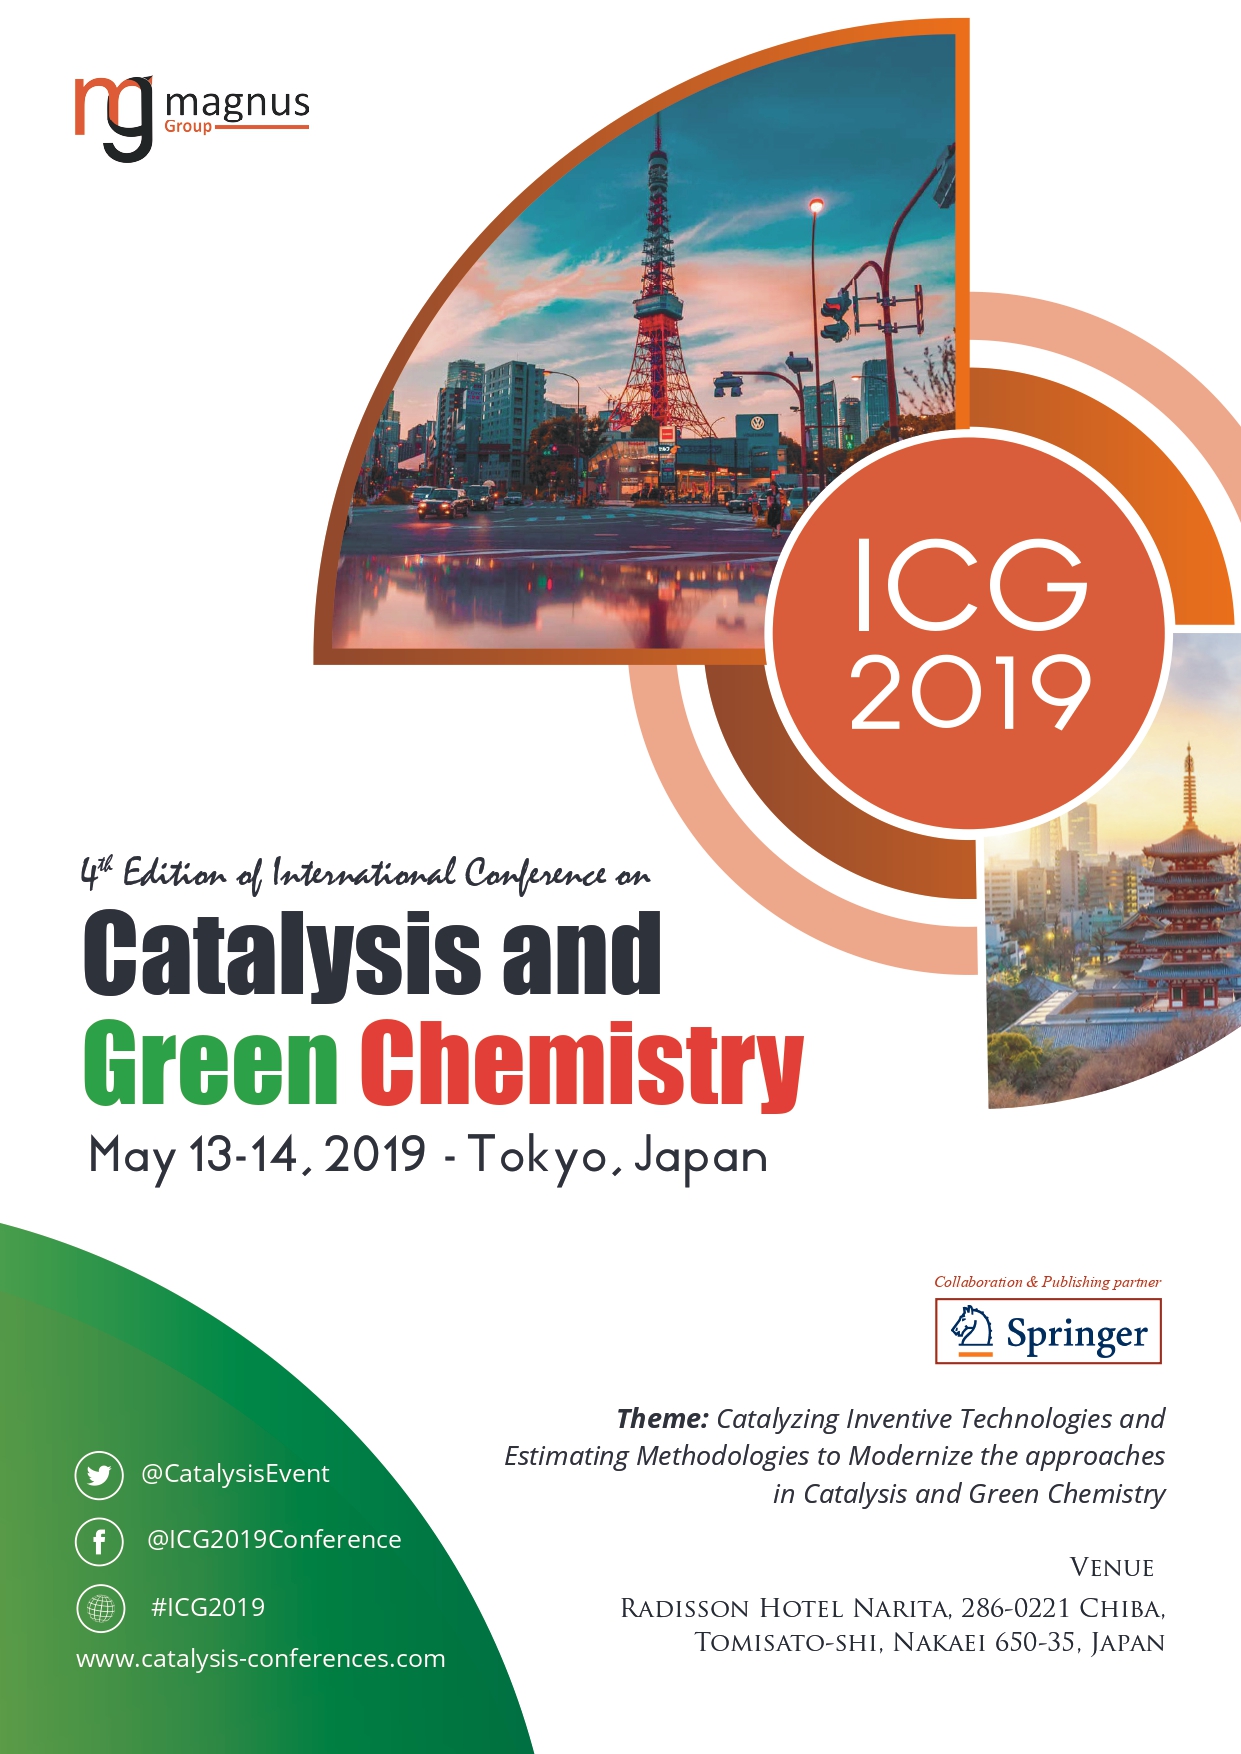 Catalysis and Green Chemistry | Tokyo, Japan Event Book